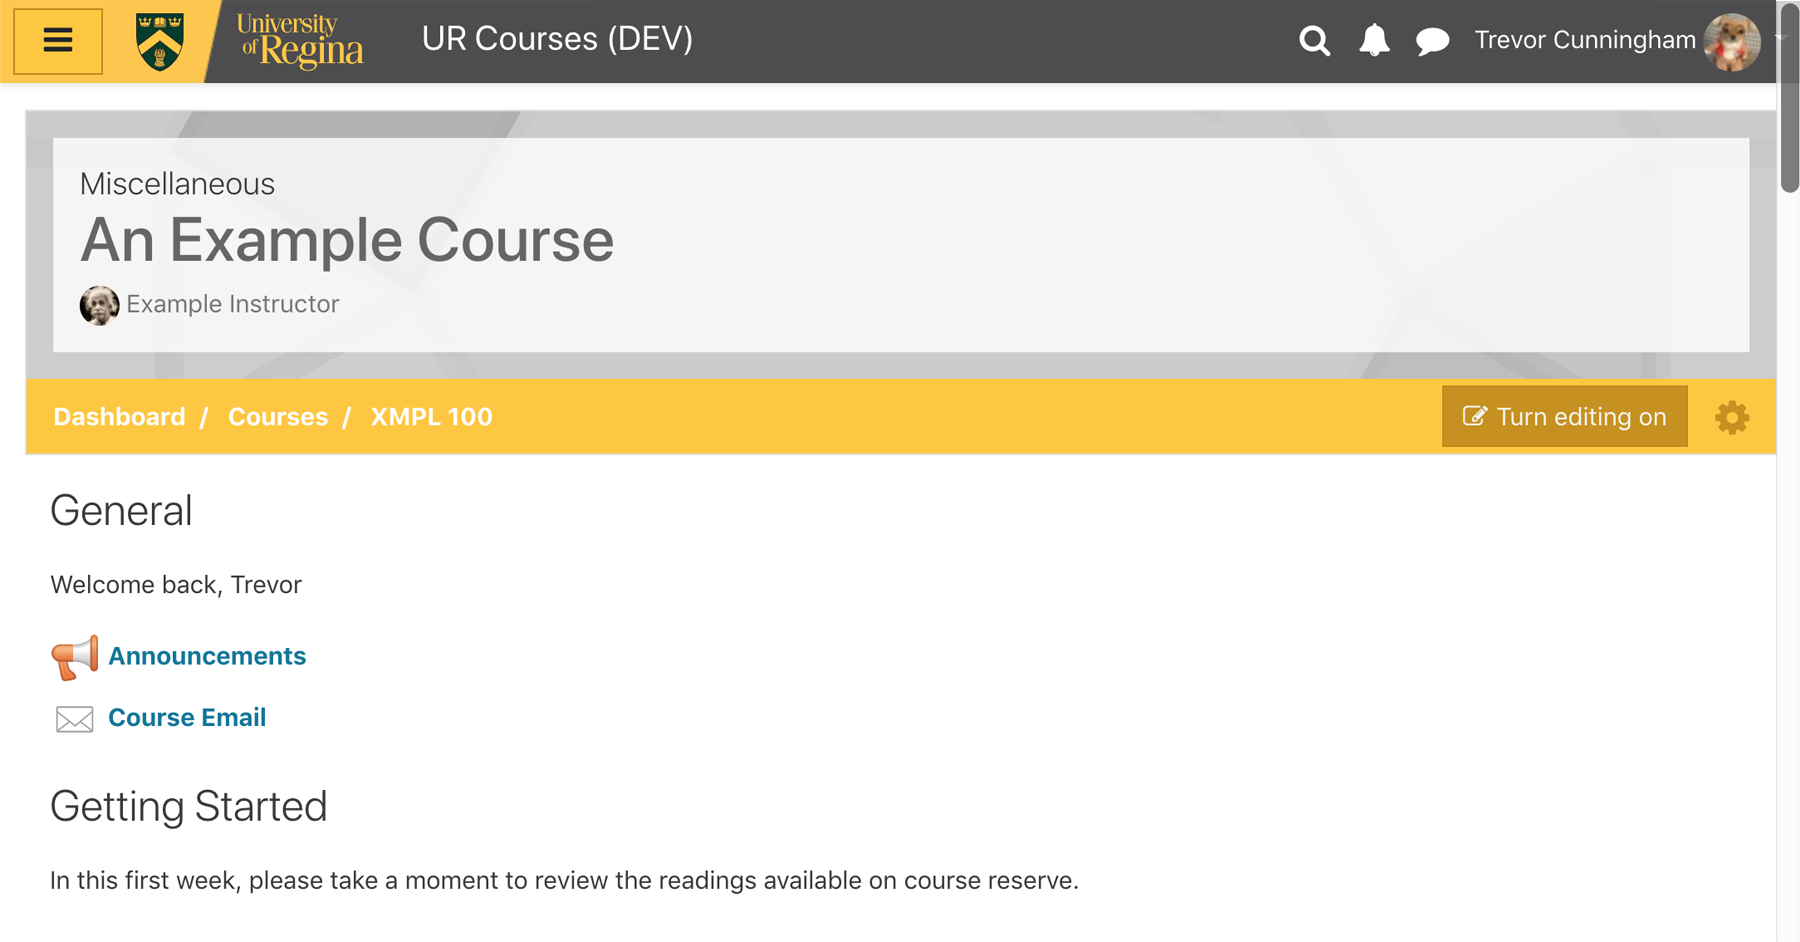 What's New screenshot of UR Courses